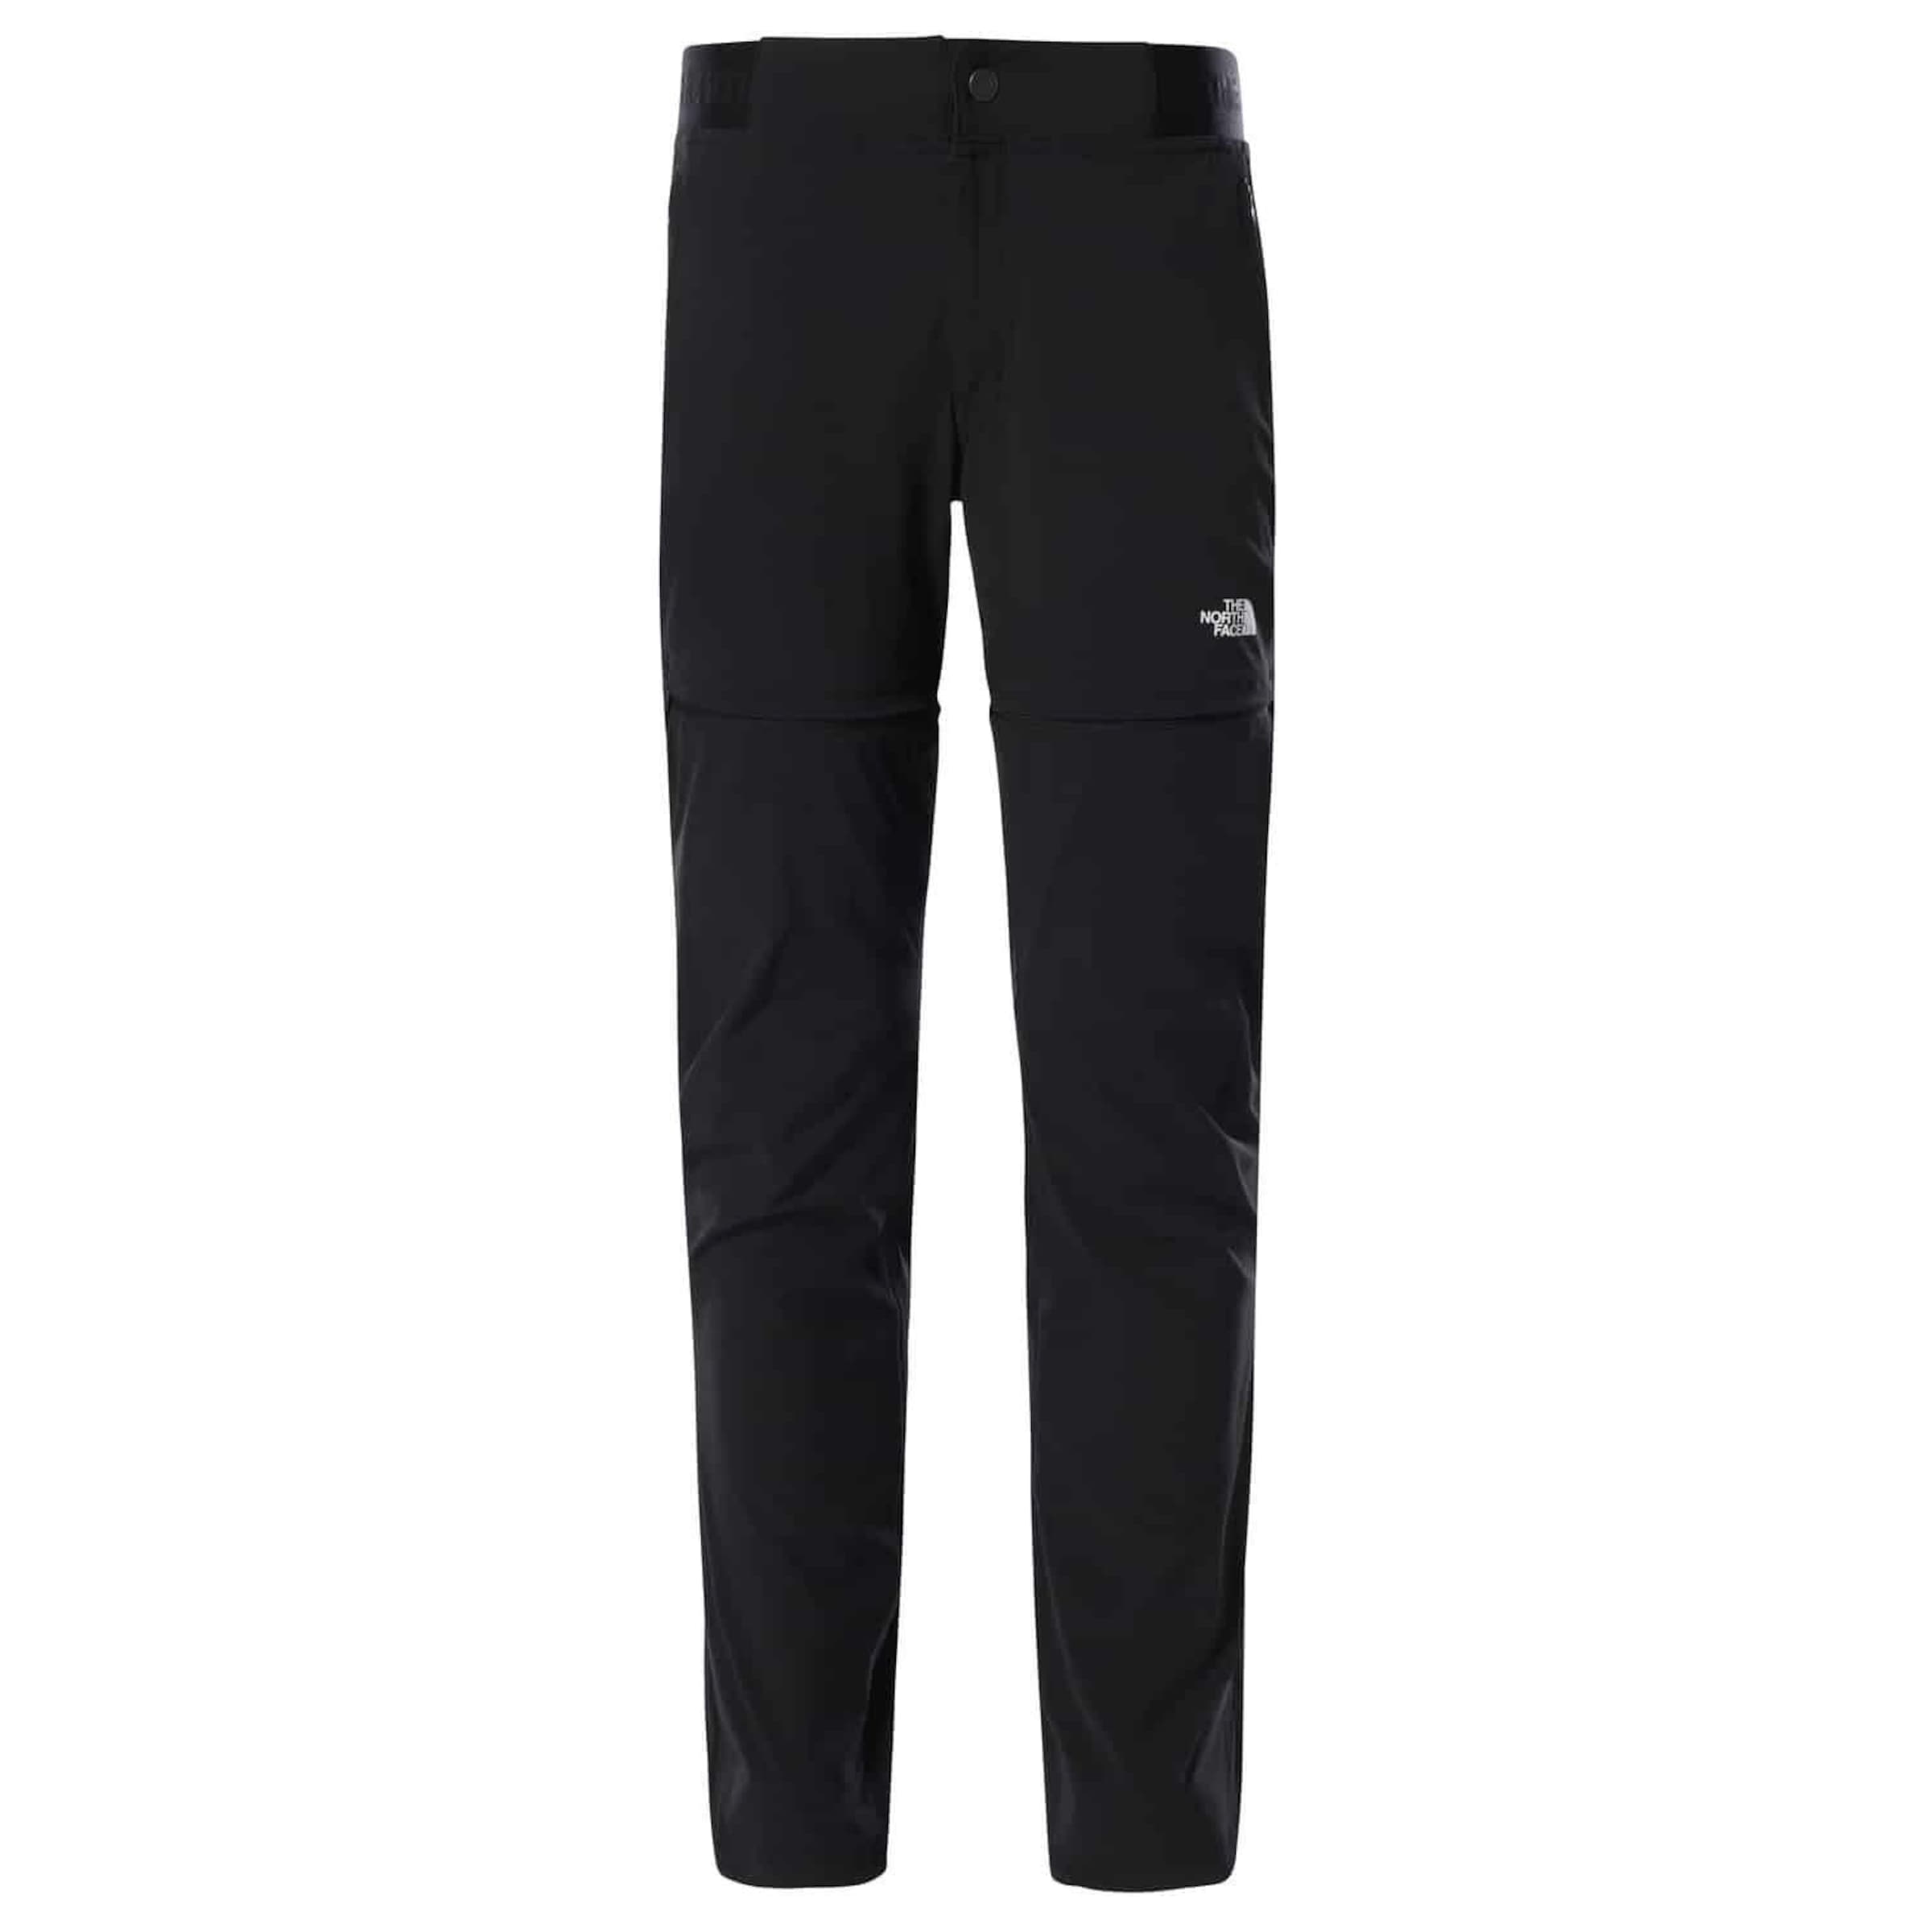 THE NORTH FACE Outdoorhose SPEEDLIGHT CONV PANT in Schwarz 